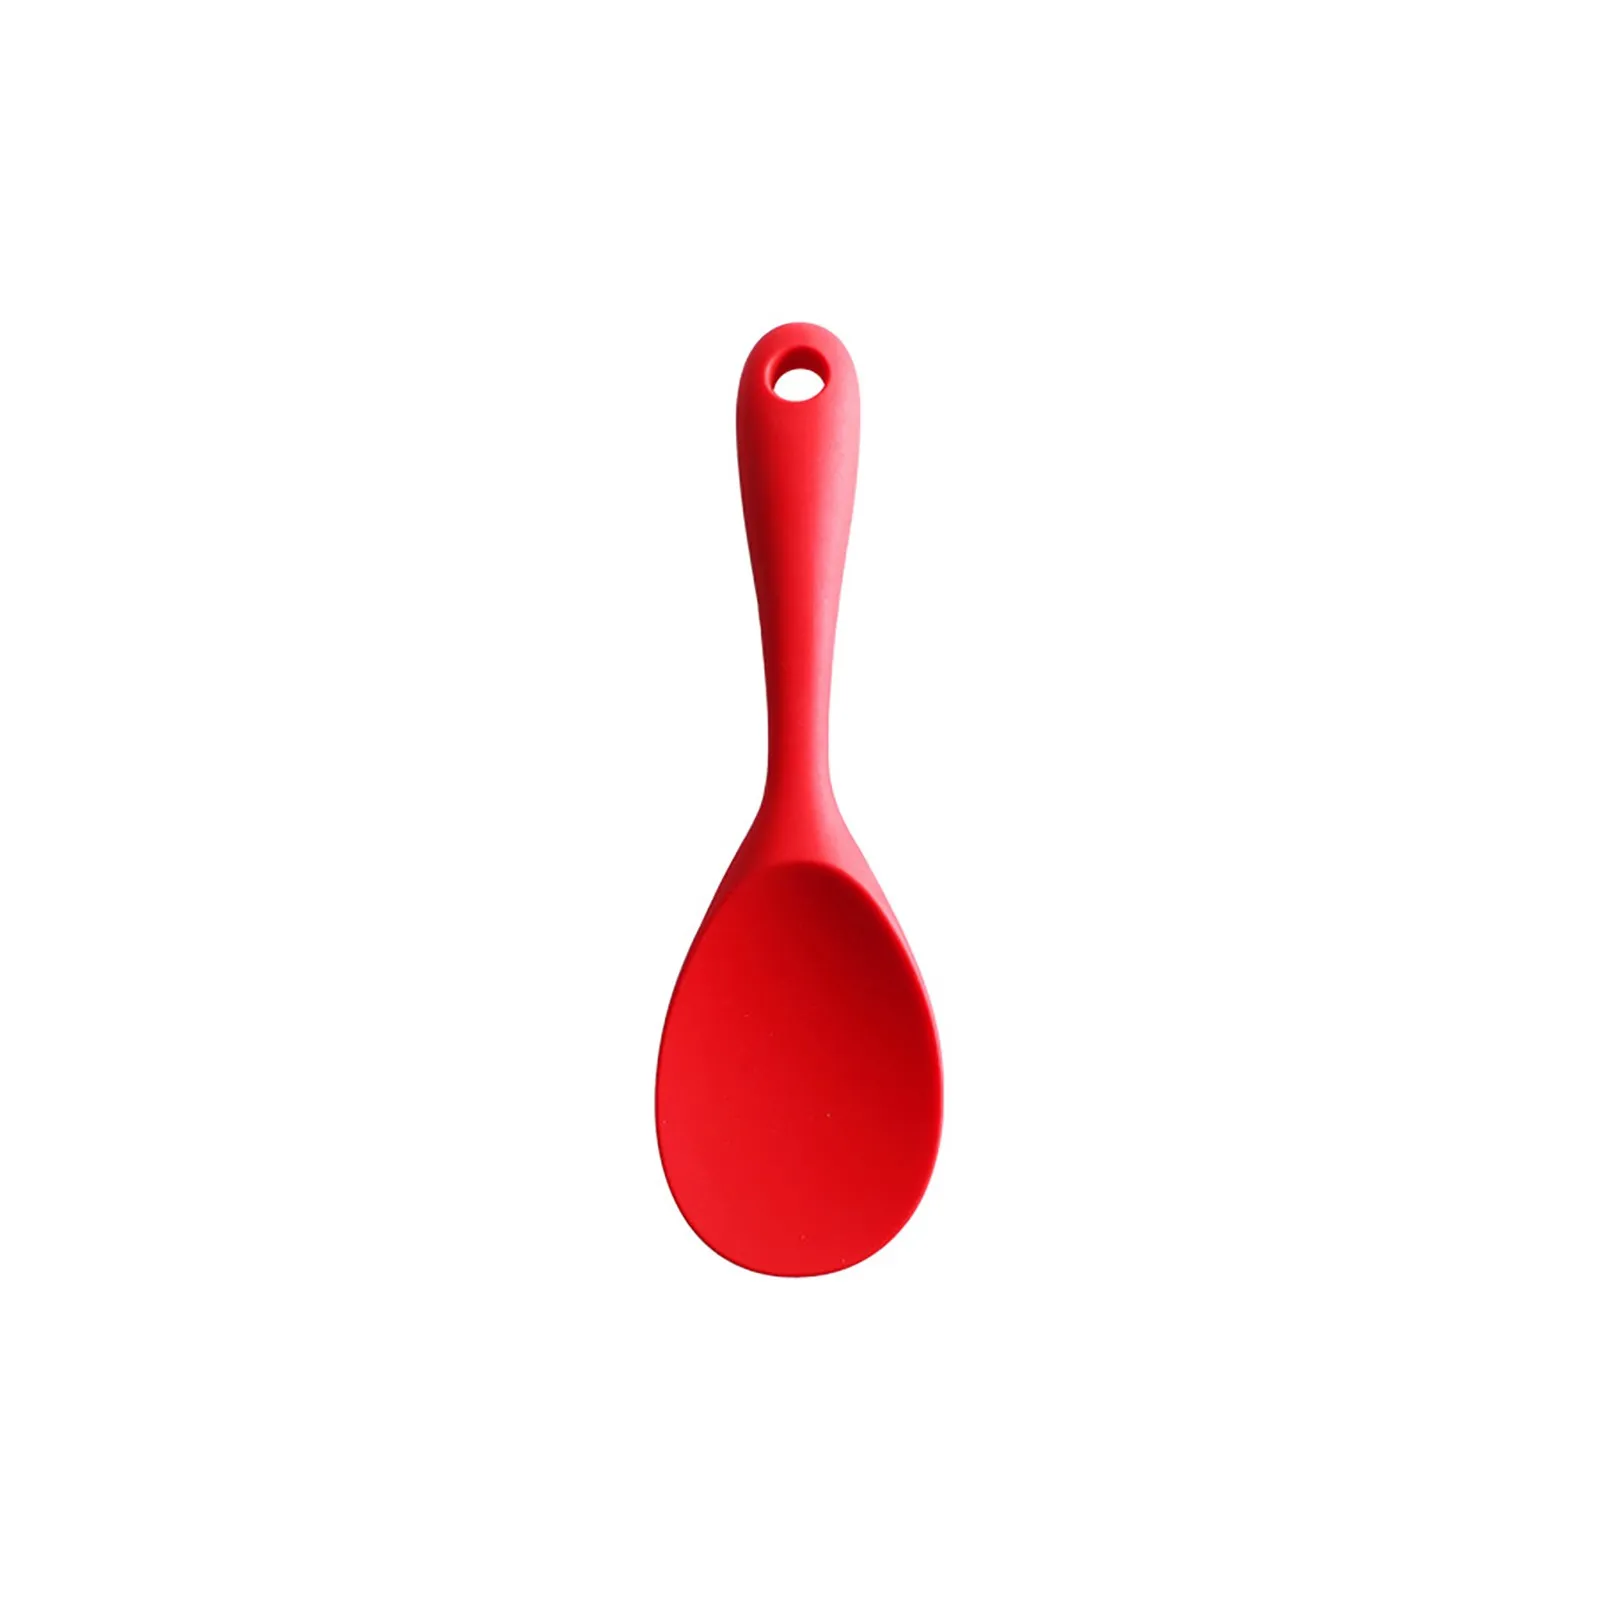 Rubber Silicone Cookware Chinese Spatula Rice Spoon Leaky Baking